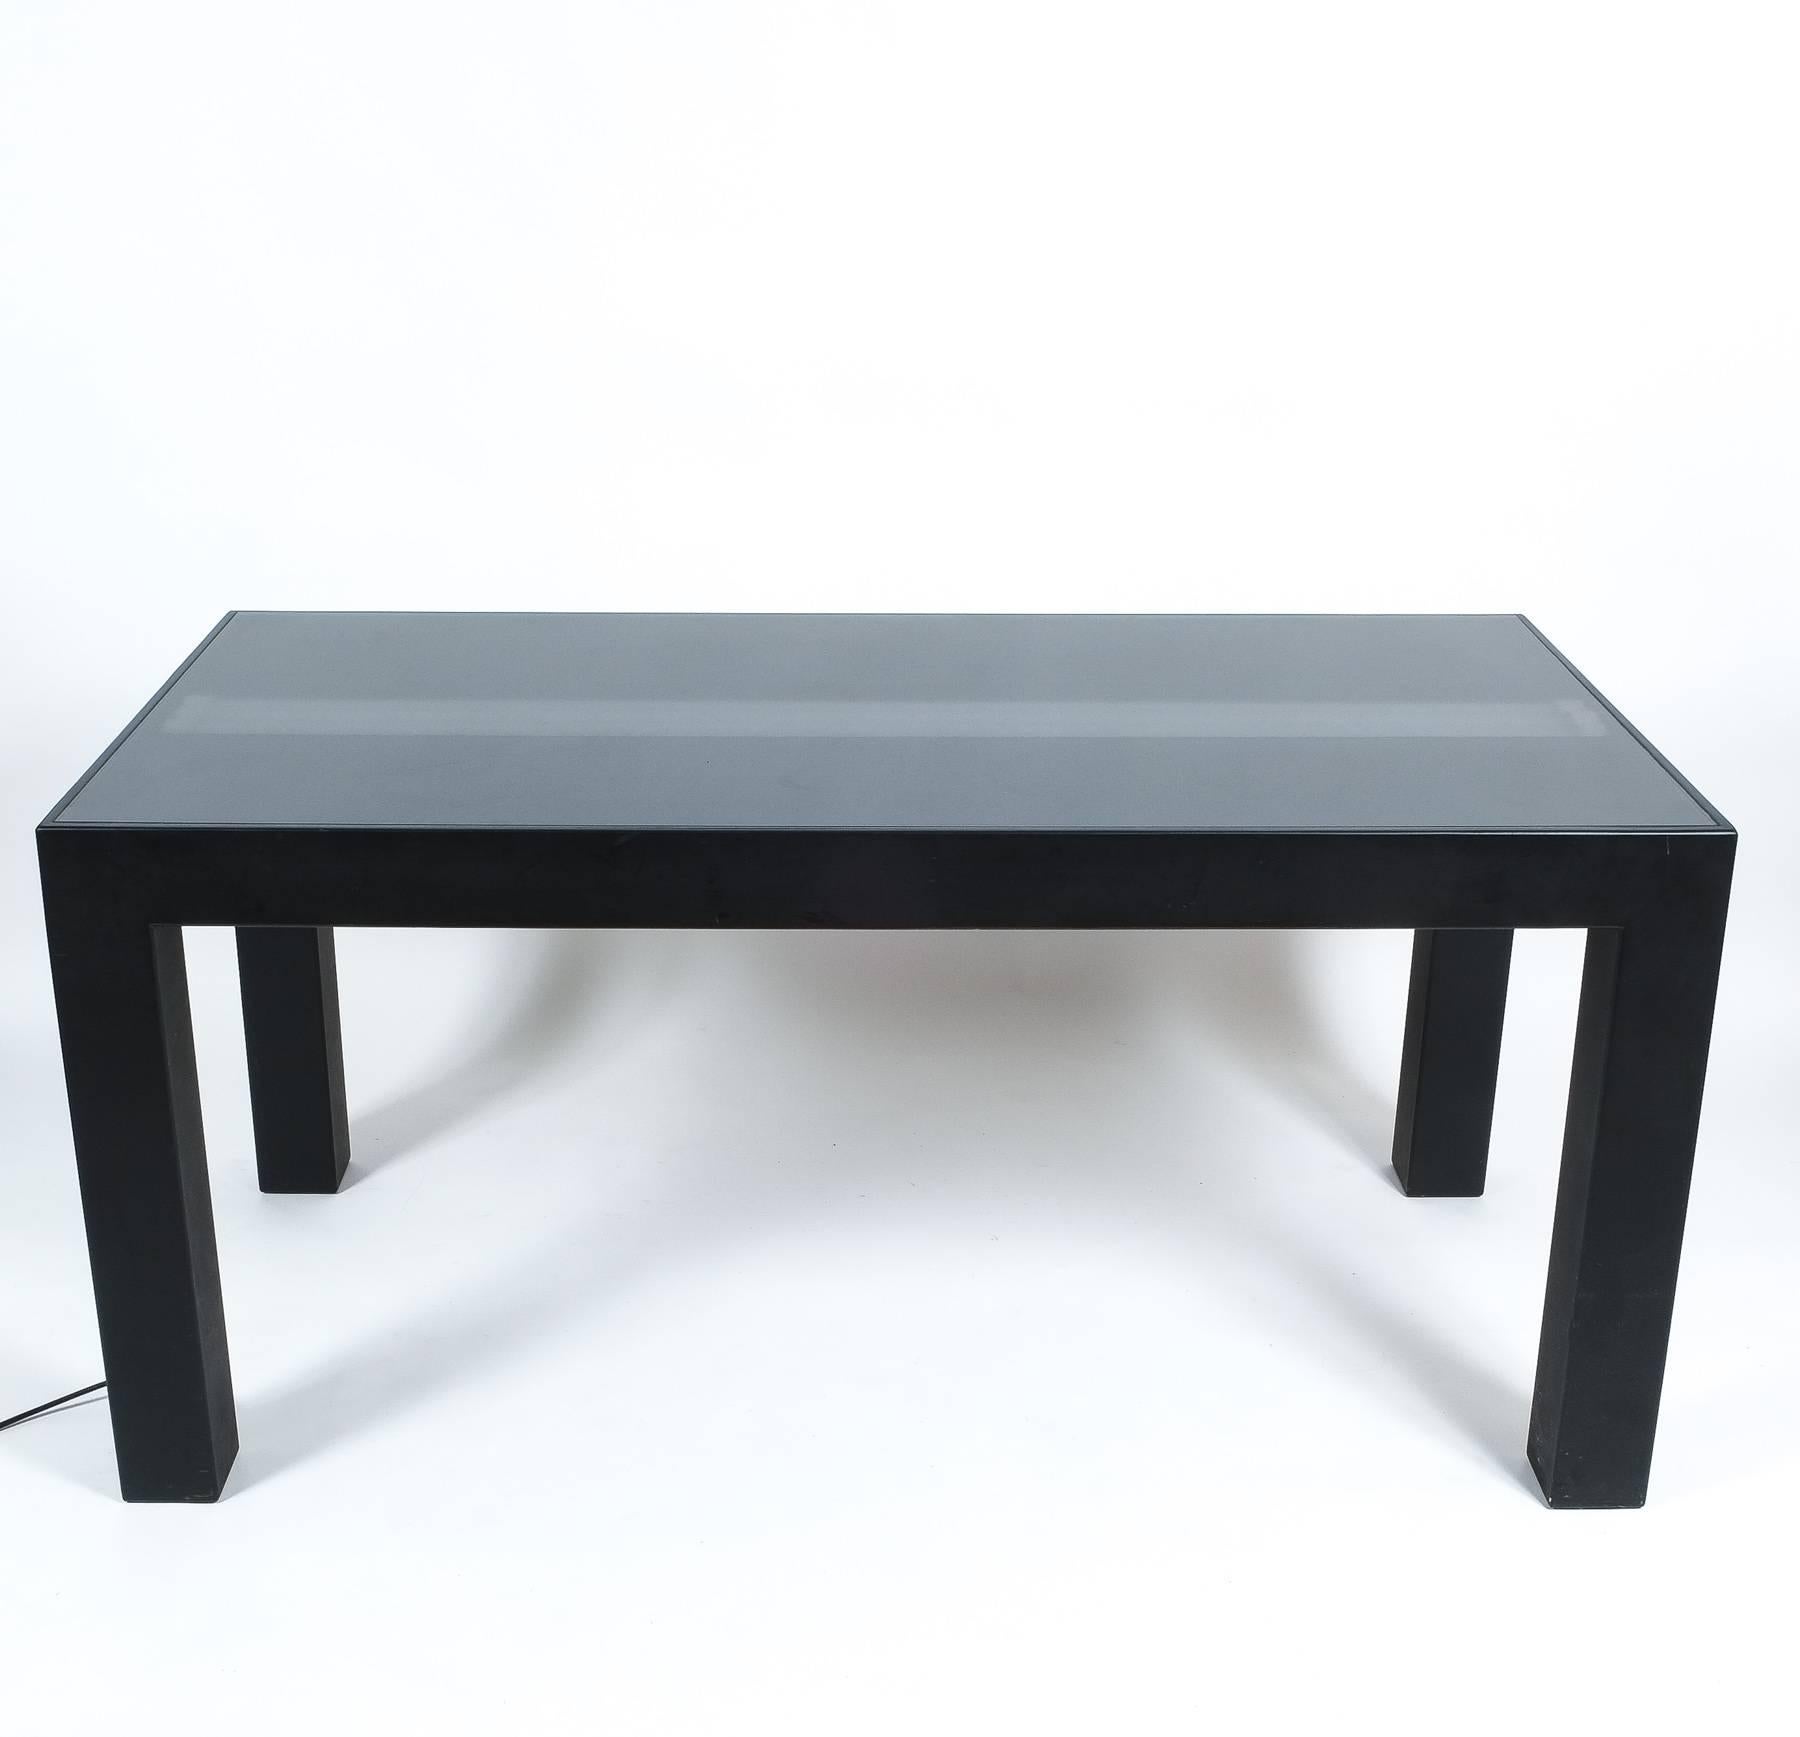 Johanna Grawunder Illuminated Dining Table by  for Post-Design, 2001 For Sale 2